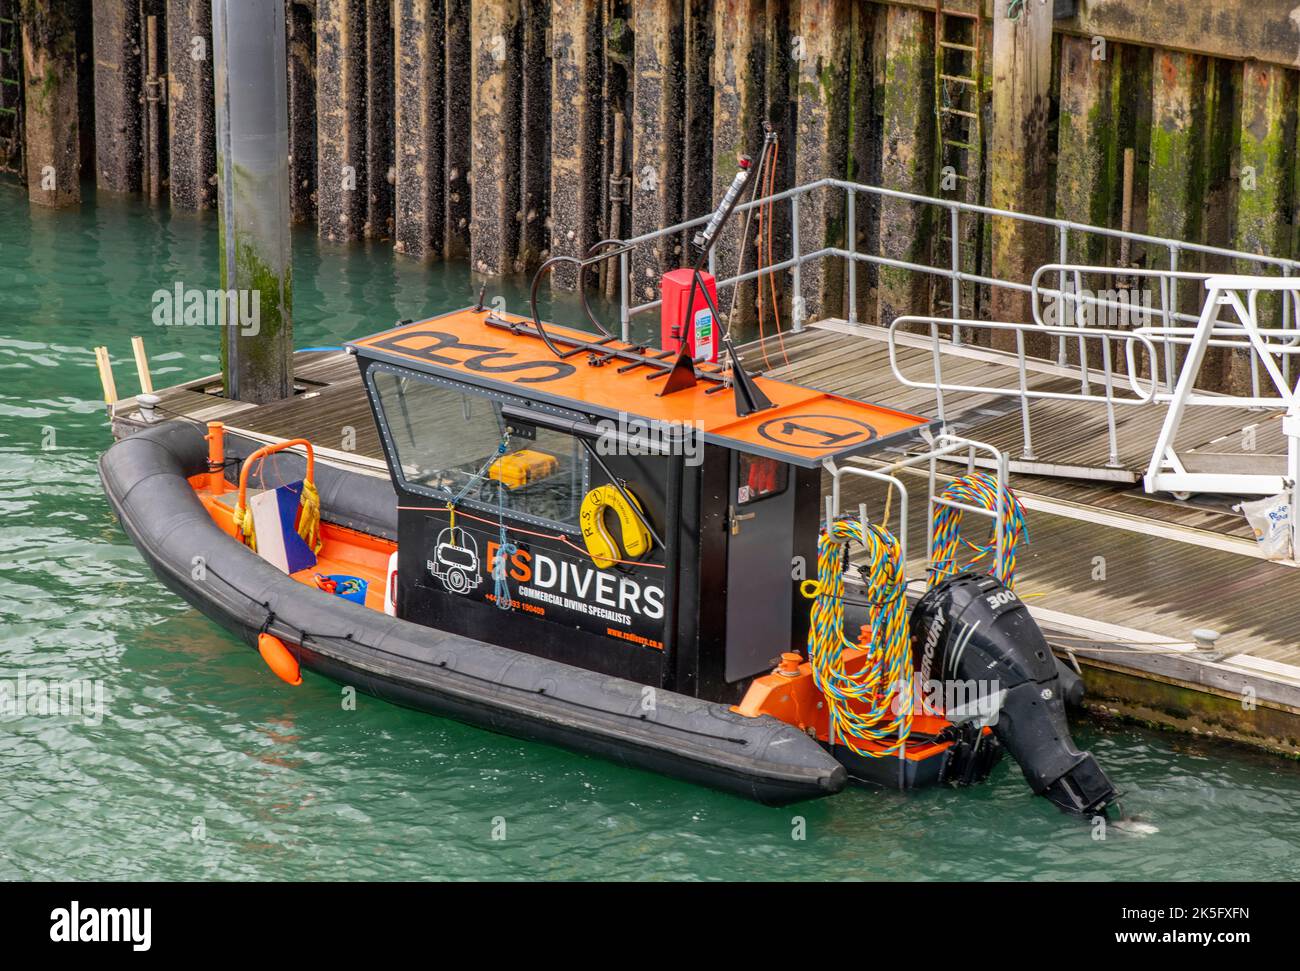 divers rib boat alongside in portsmouth harbour, commercial divers vessel tied up in port at portsmouth uk Stock Photo